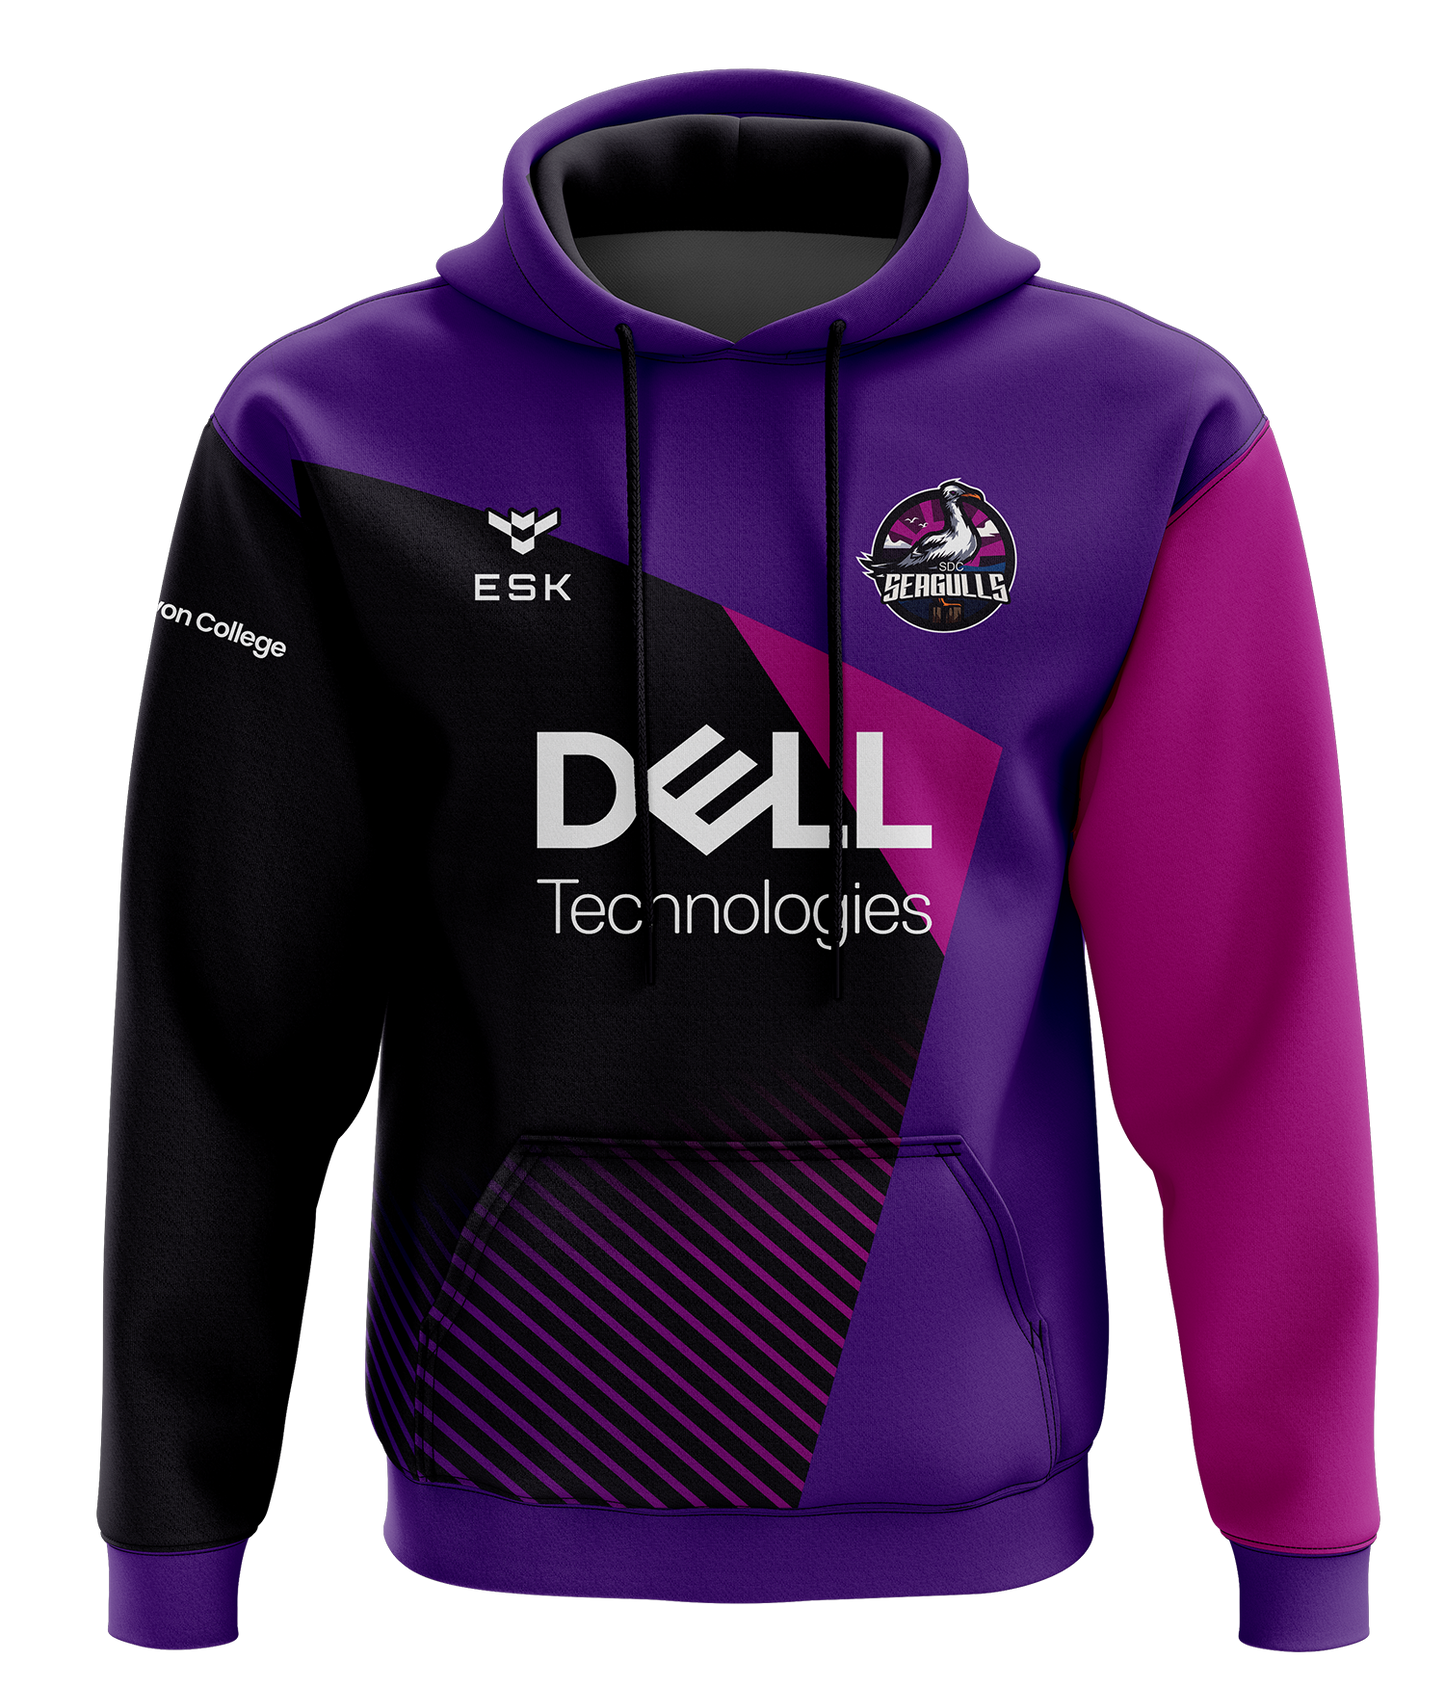 SDC Seagulls Esports Hoodie - with Gamertag